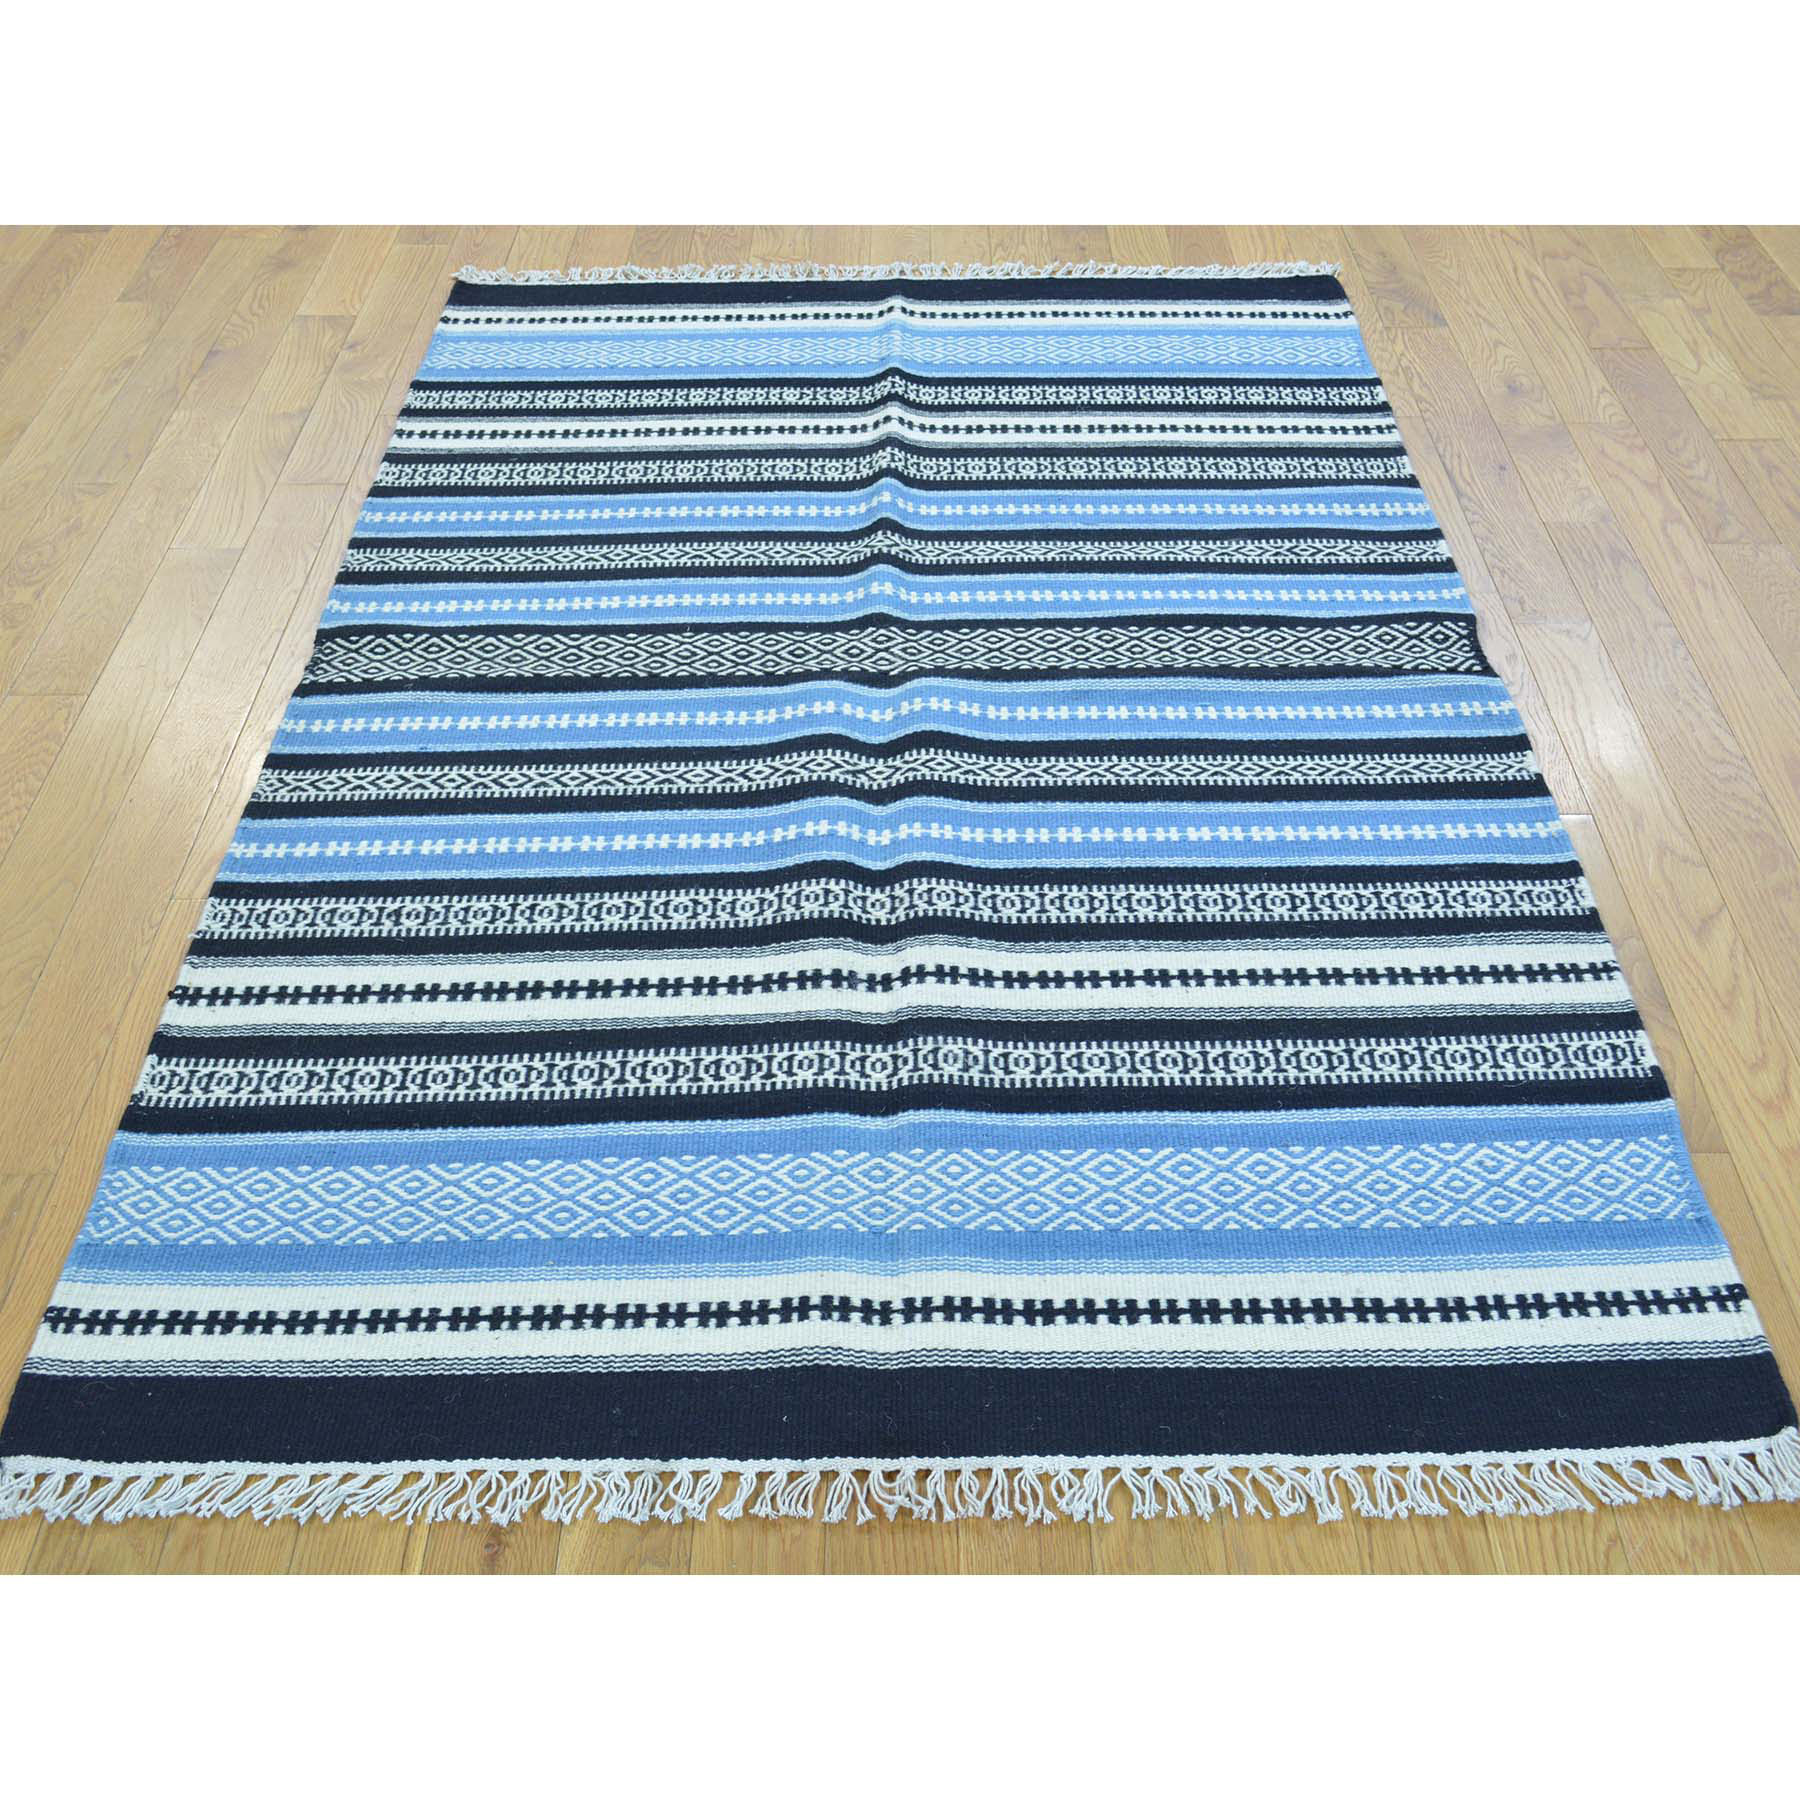 3'10"x6'1" Striped Flat Weave Durie Kilim Hand Woven Oriental Rug 